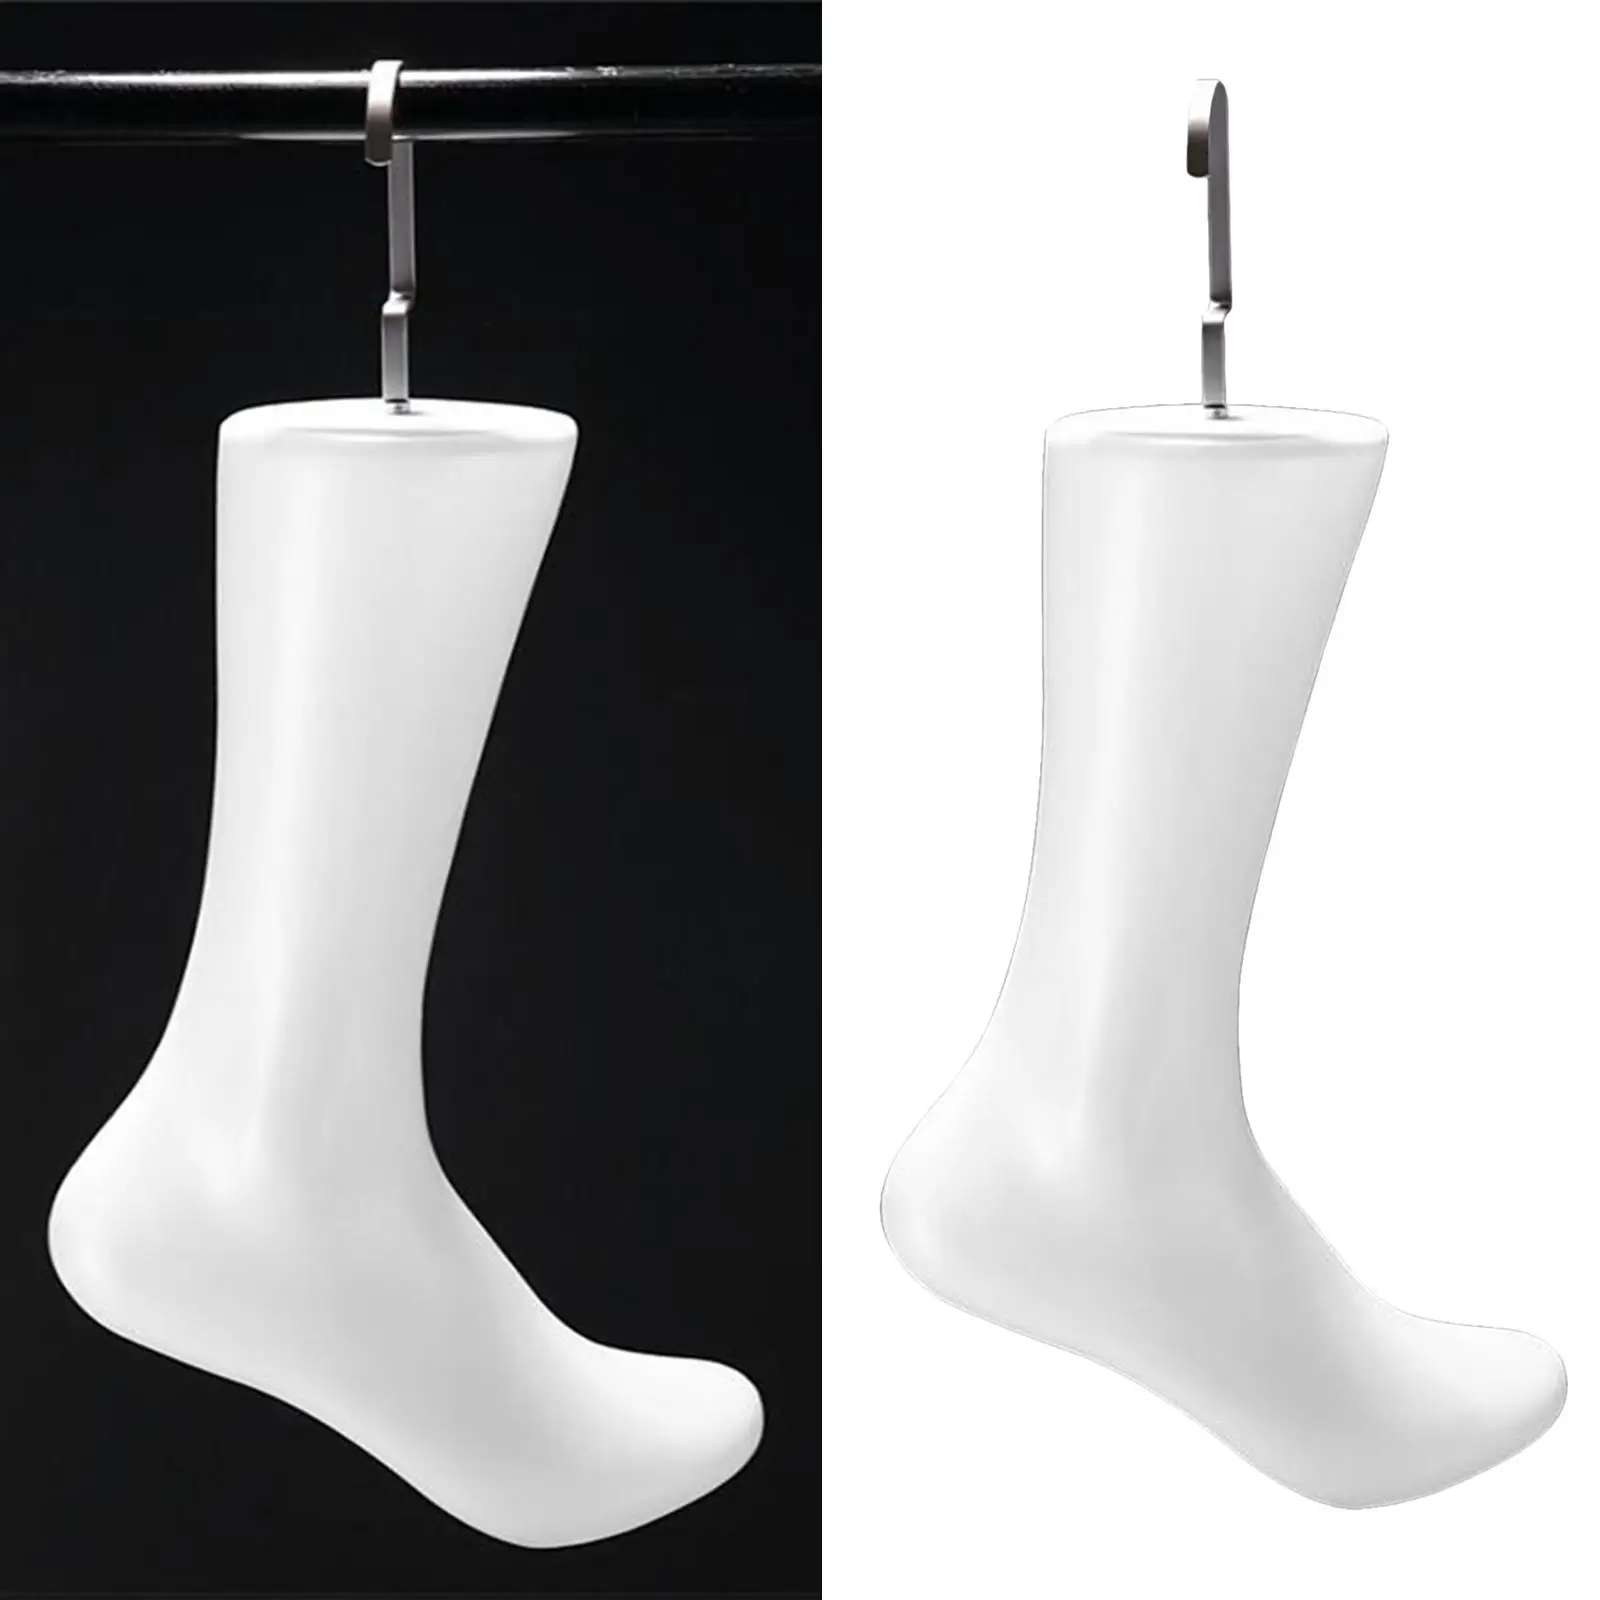 32x23cm (HxL) White Standing Leg Foot  with Hook, Feet Model for Female and Male Display Sock Shoes